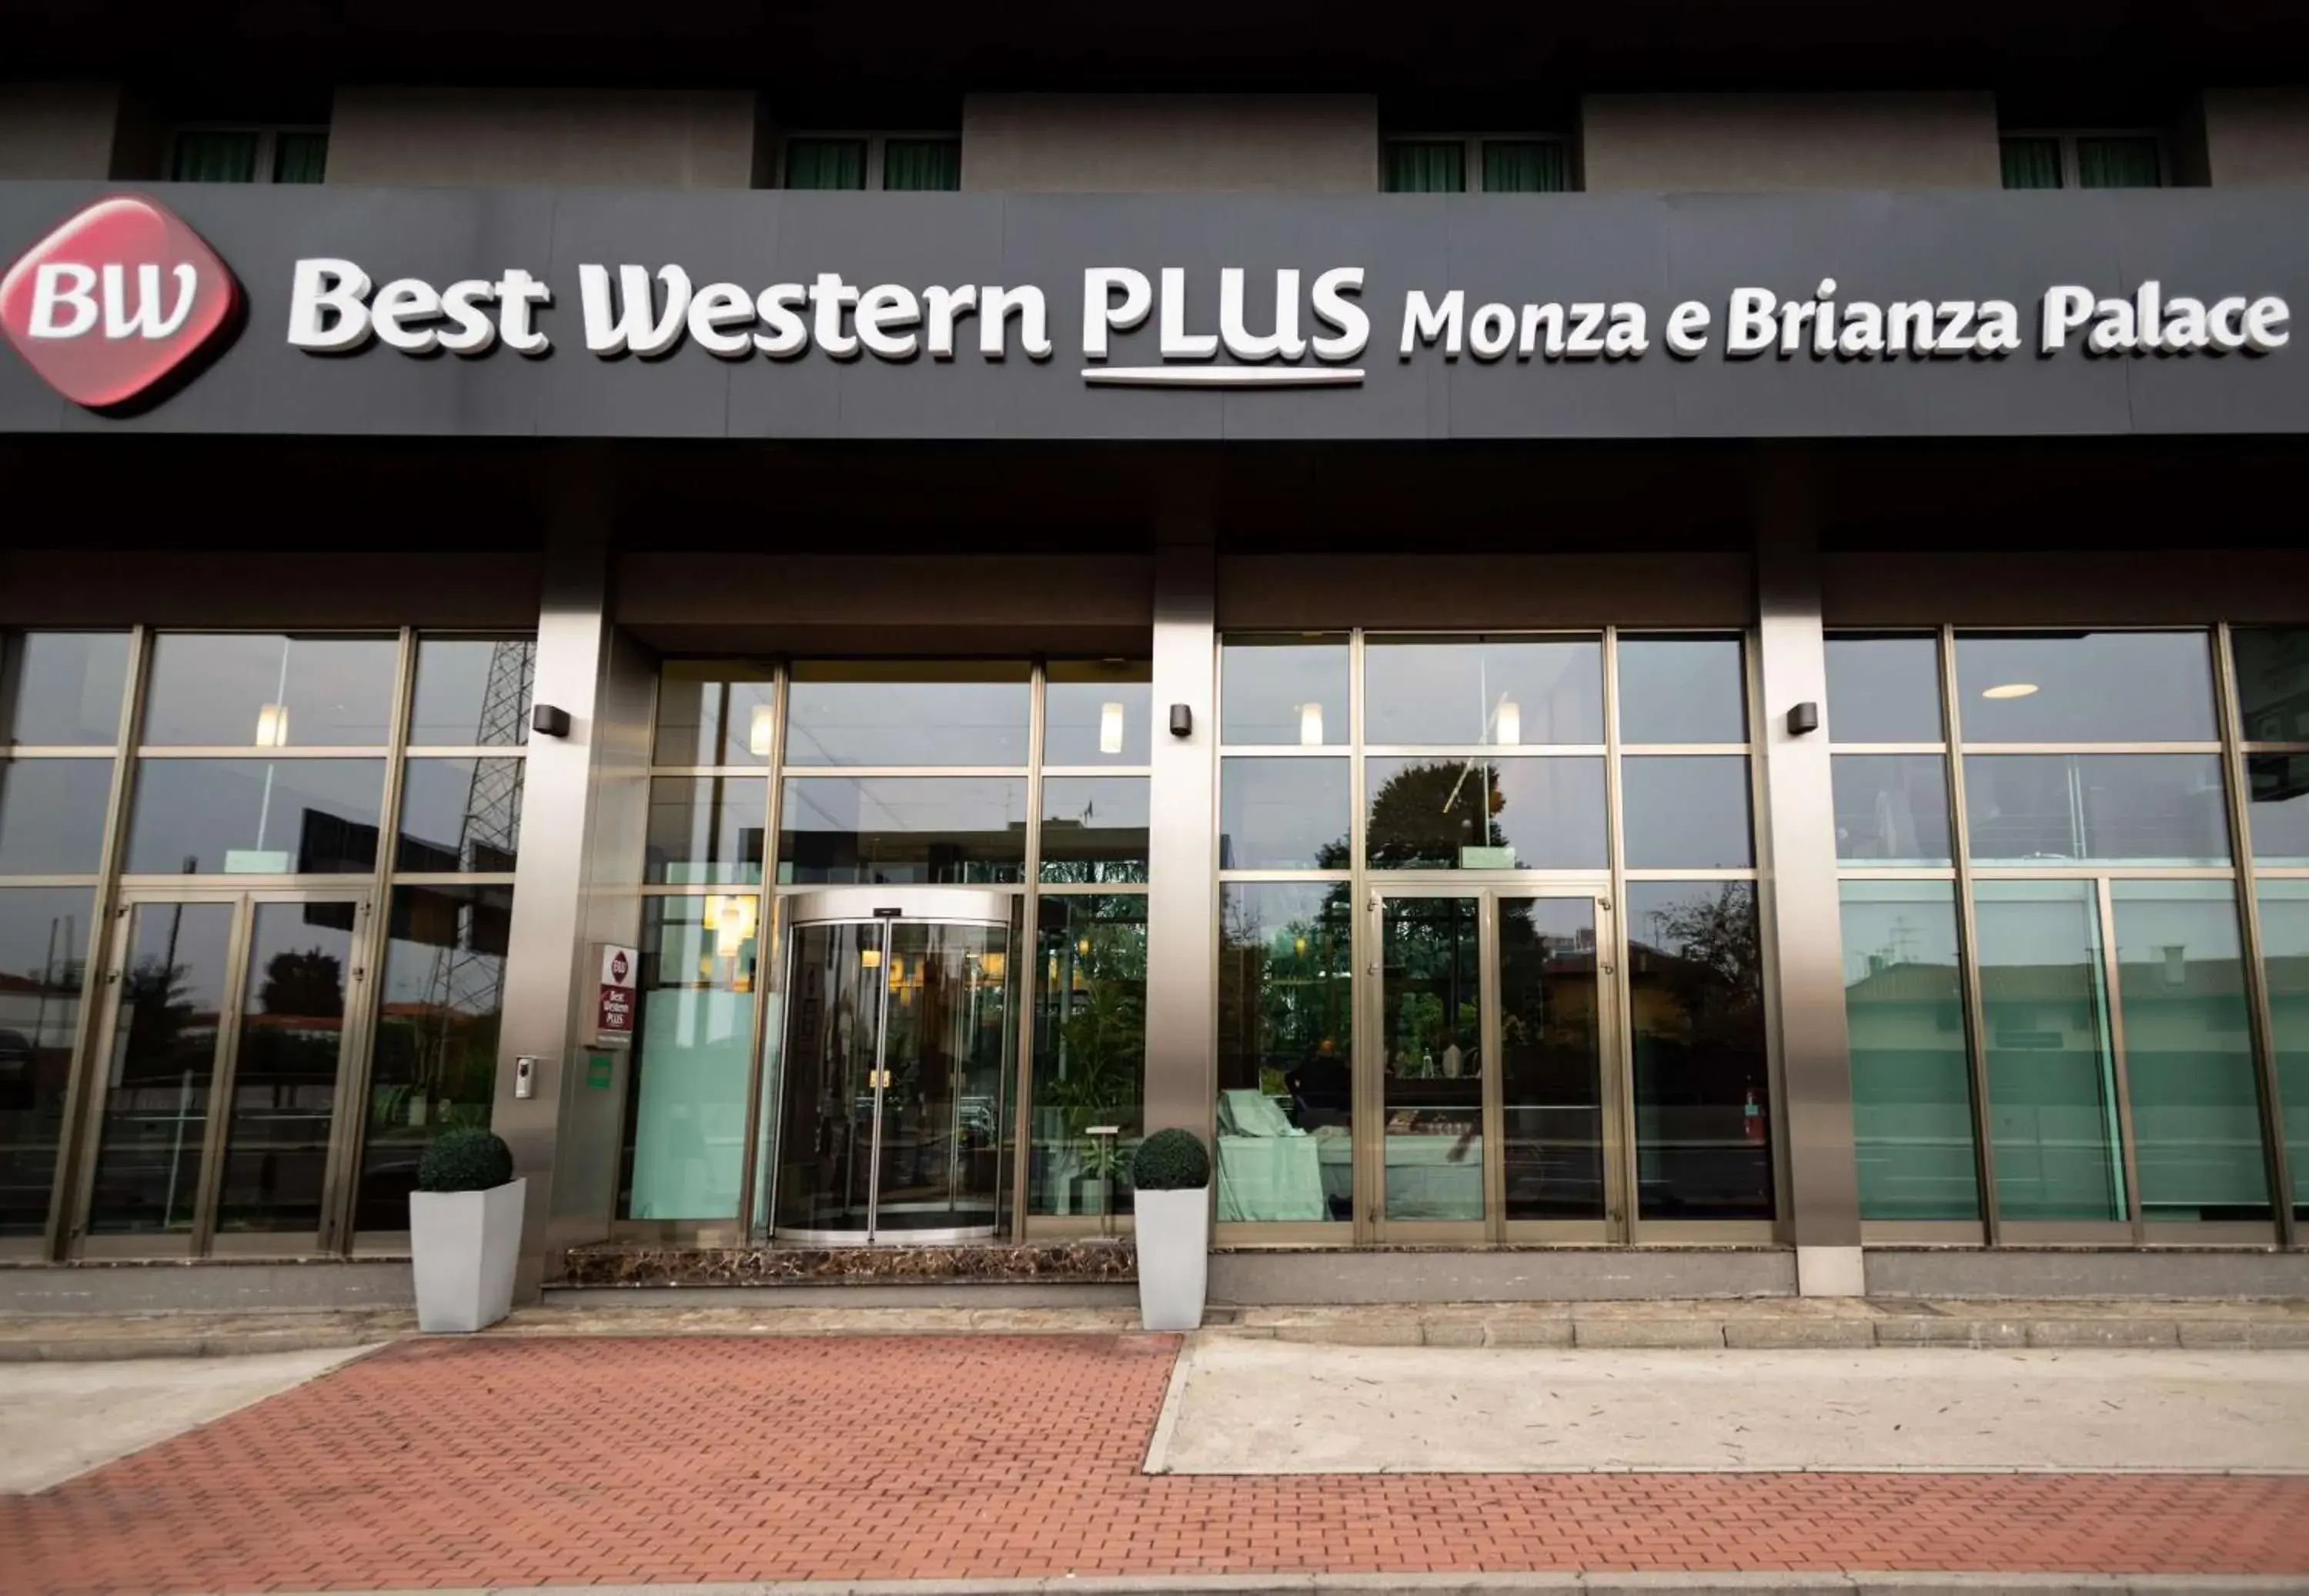 Property building in Best Western Premier Hotel Monza E Brianza Palace